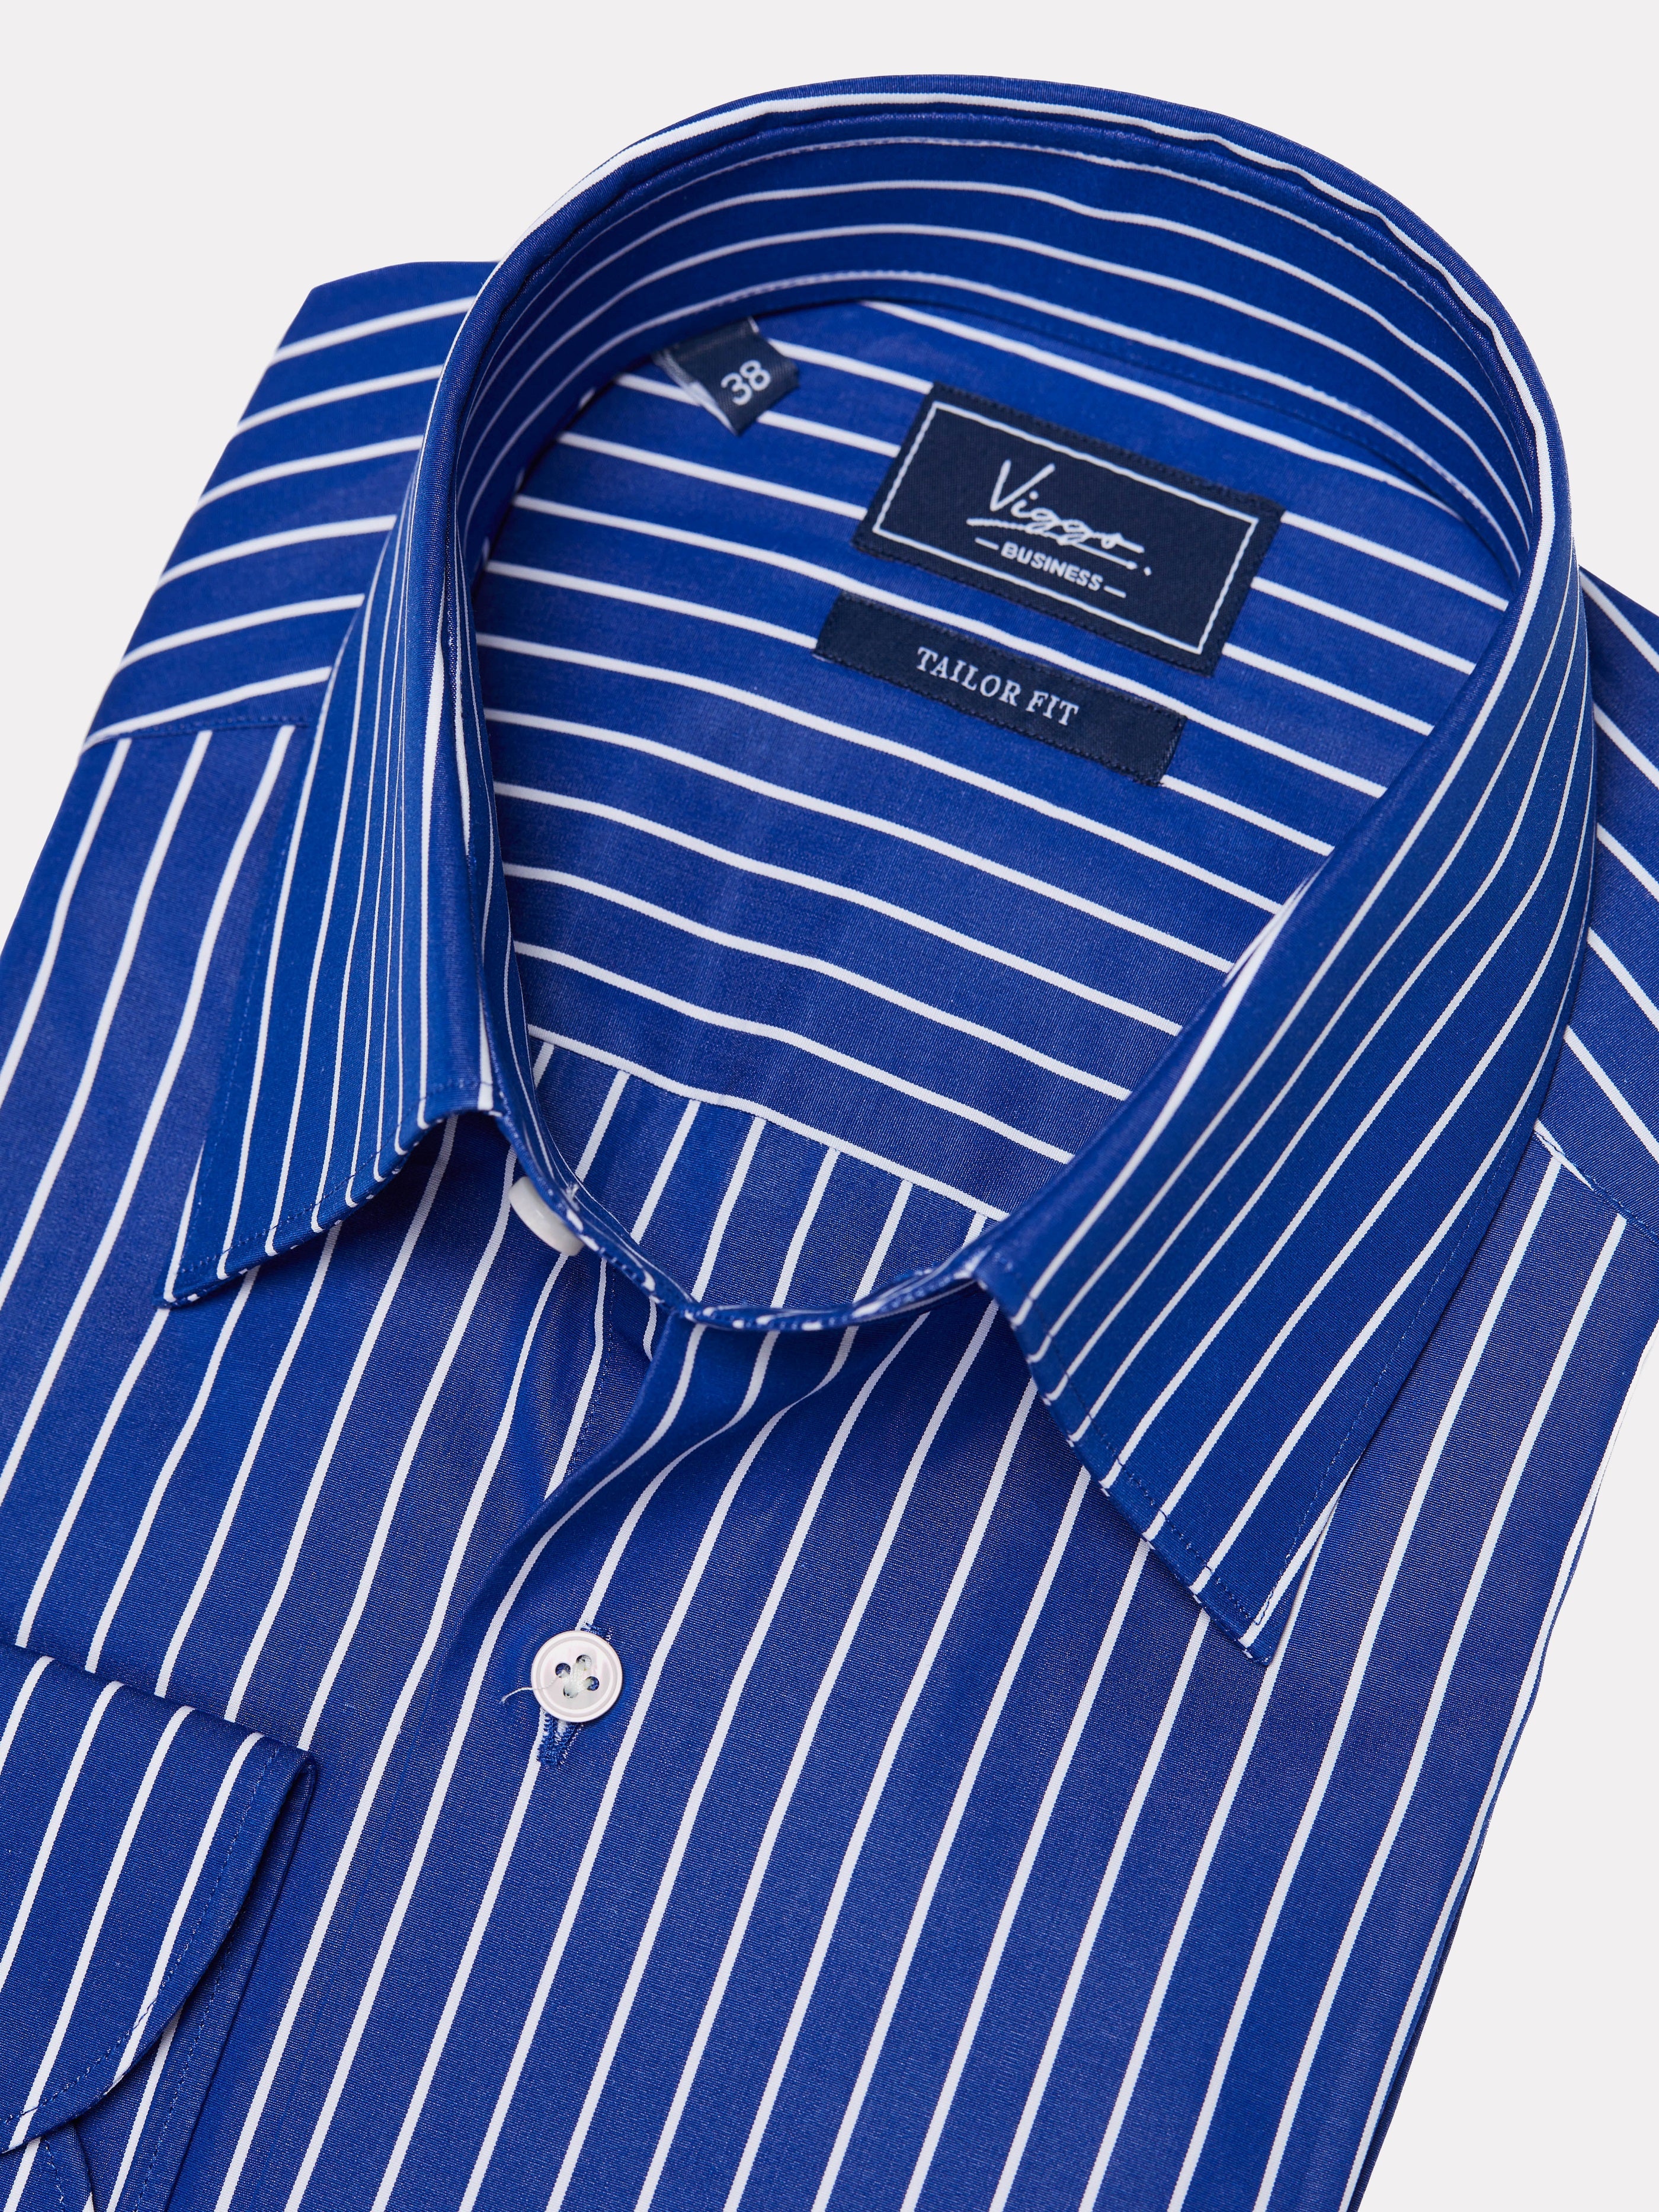 Electric blue shirt with white stripes